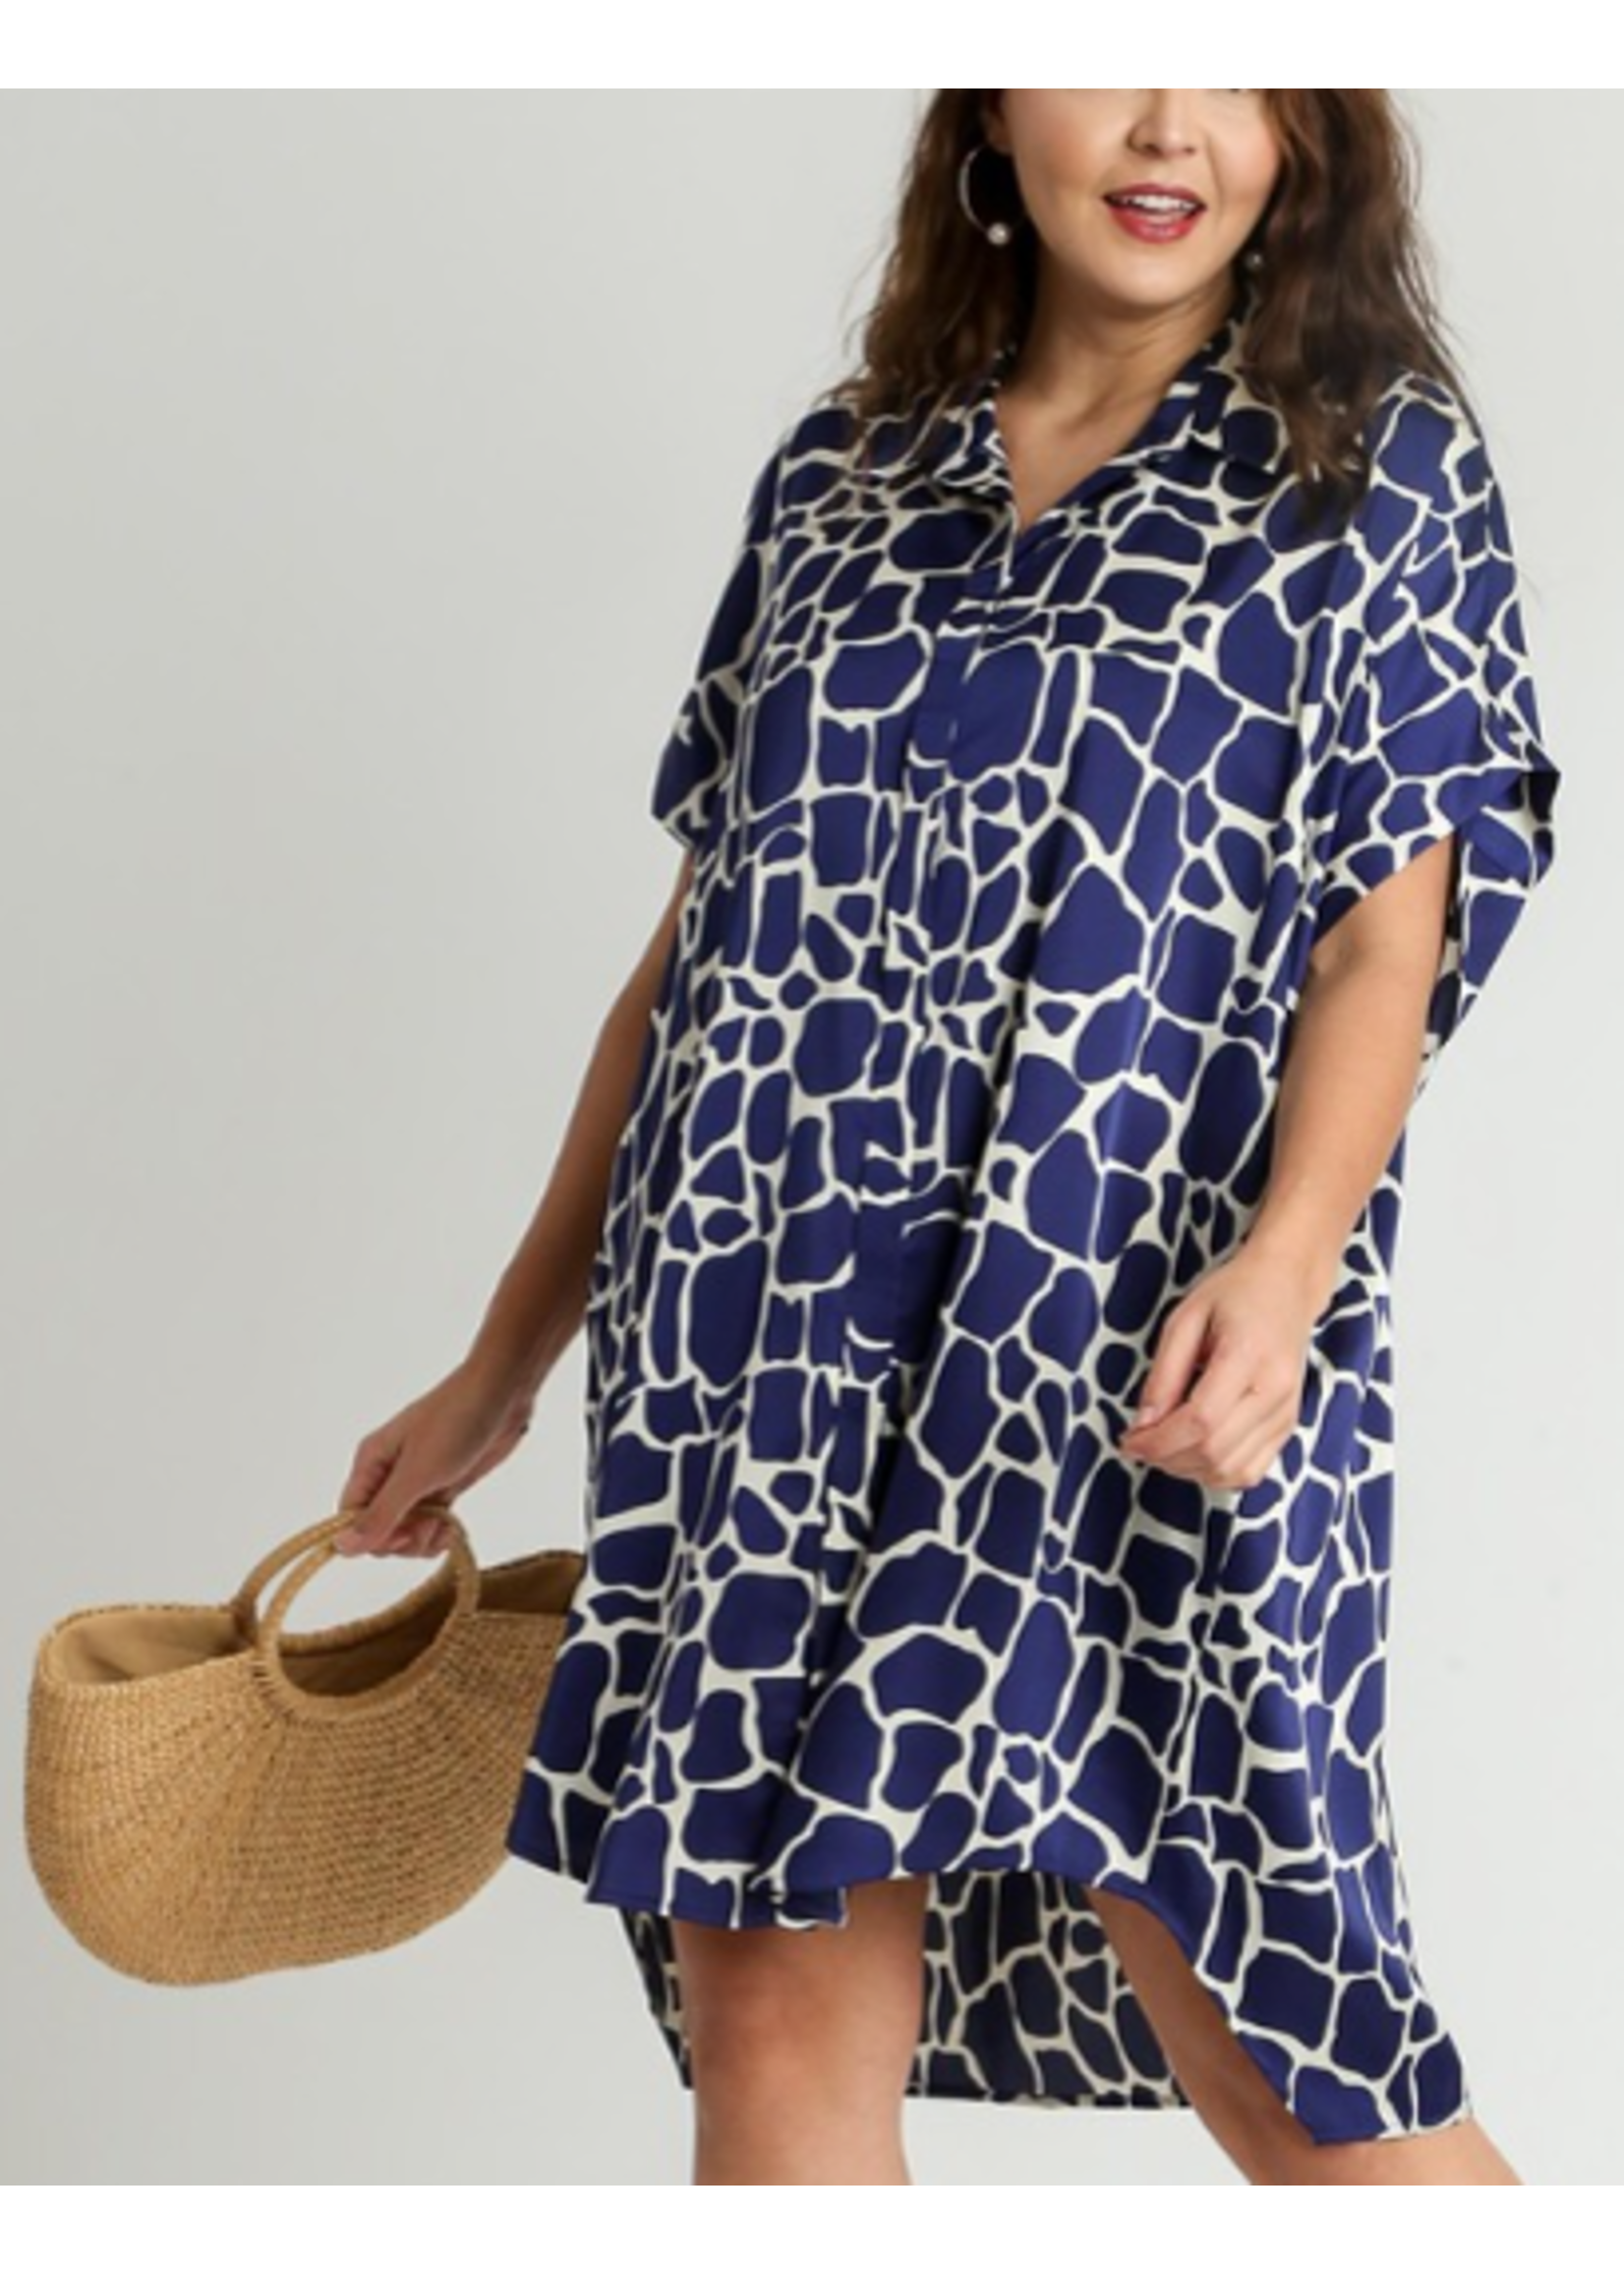 SUS68935 - TWO TONED ANIMAL PRINT BUTTON DOWN DRESS